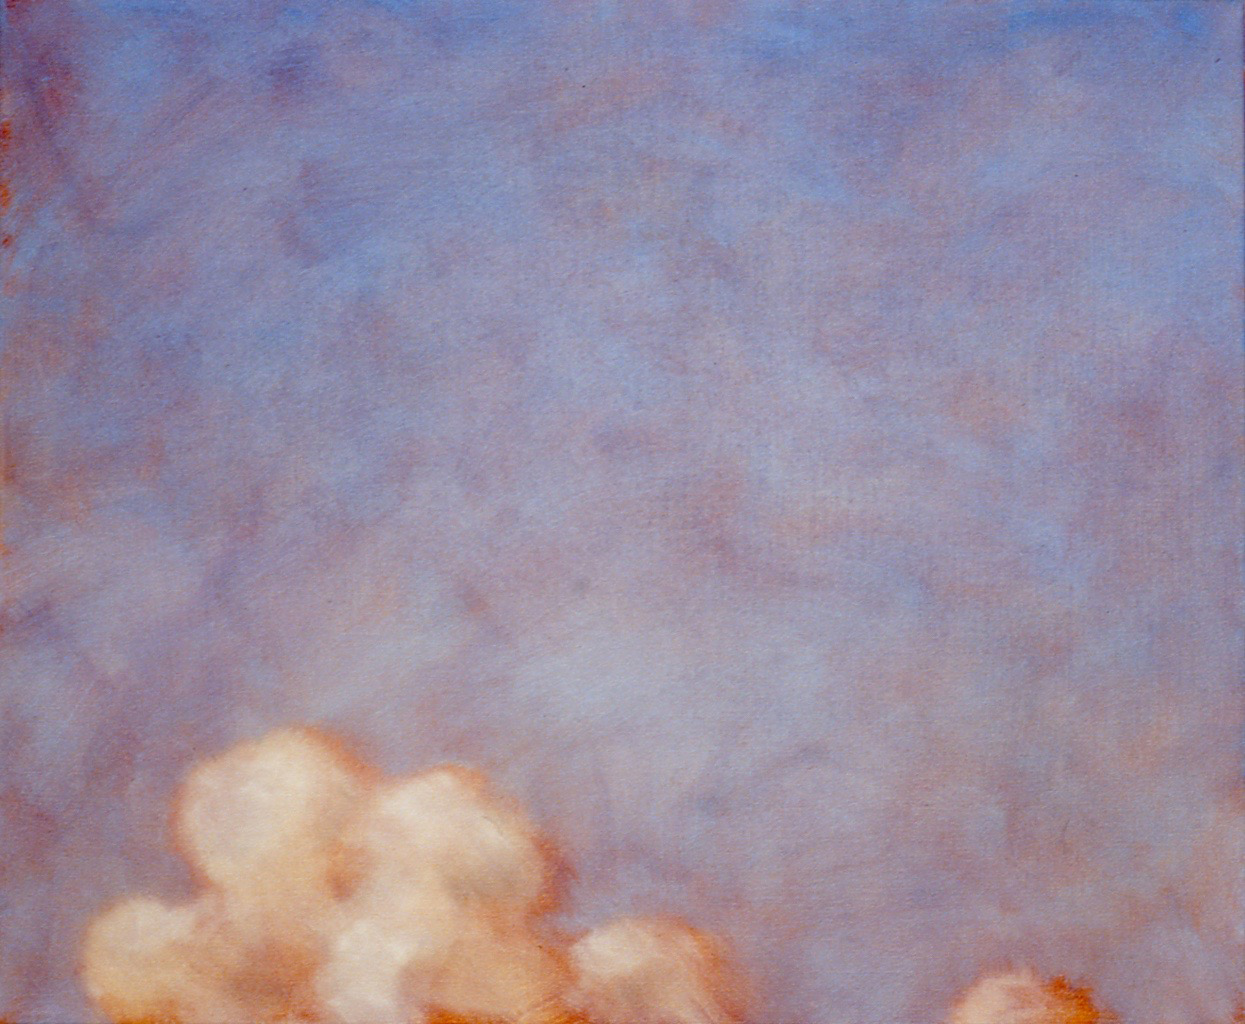   Looking Up  (detail), 1993 oil on linen 